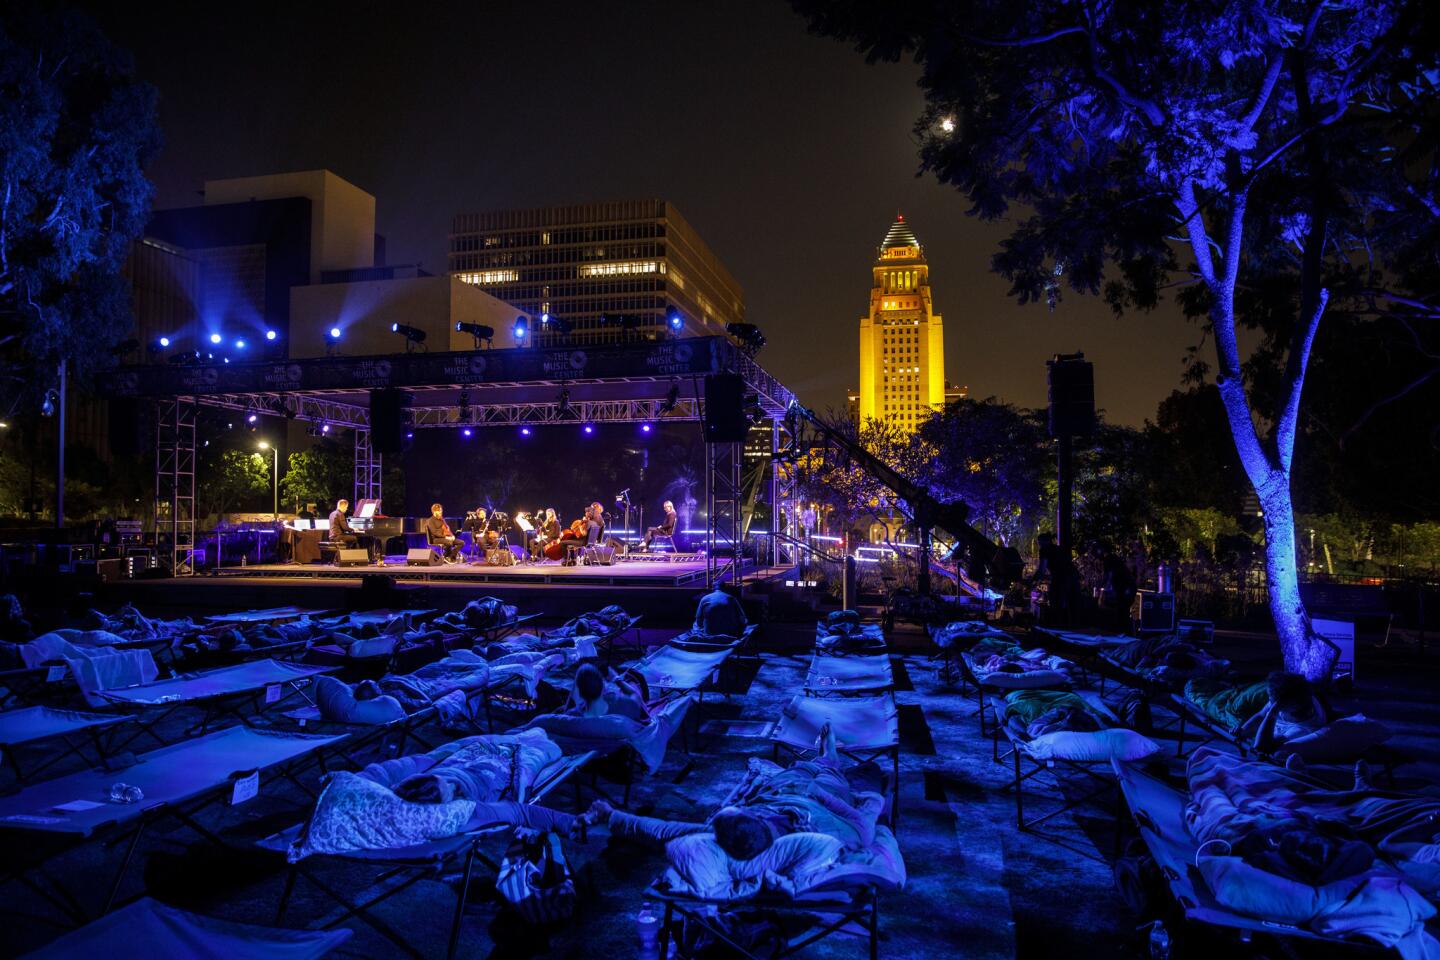 Max Richter performs "Sleep" as people lie in cots during a performance in Grand Park on Saturday, while L.A. City Hall is illuminated in gold to honor the late Los Angeles Times food critic Jonathan Gold.